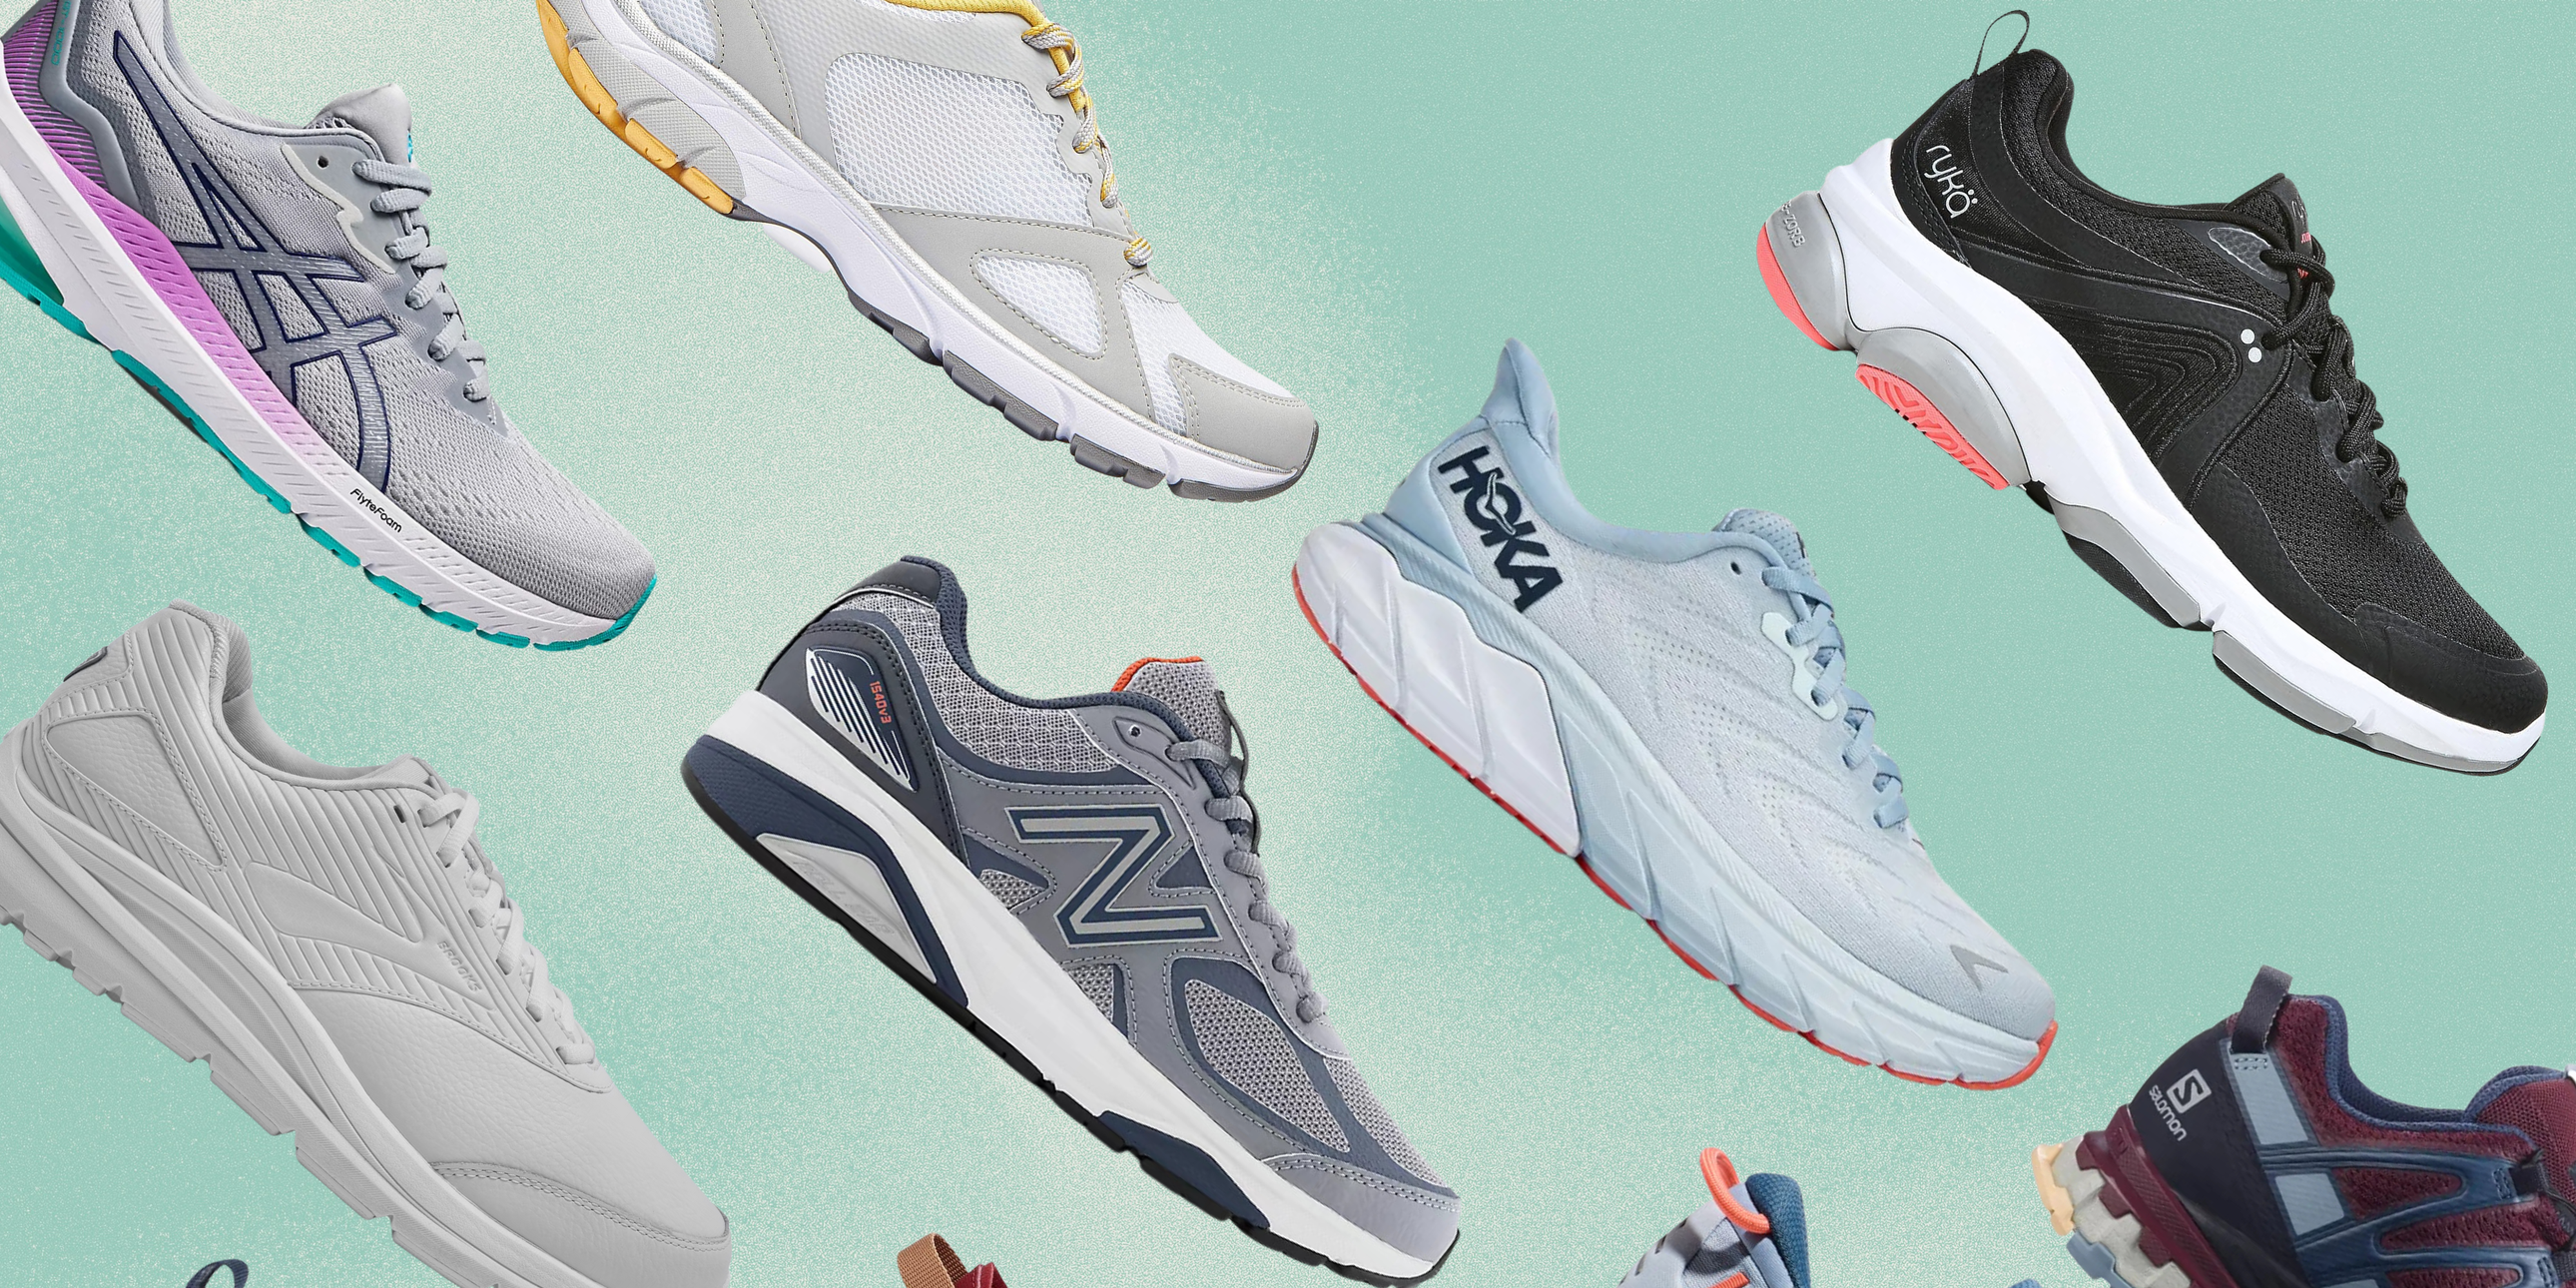 10 Best Walking Shoes for Flat Feet, According to Experts 2023